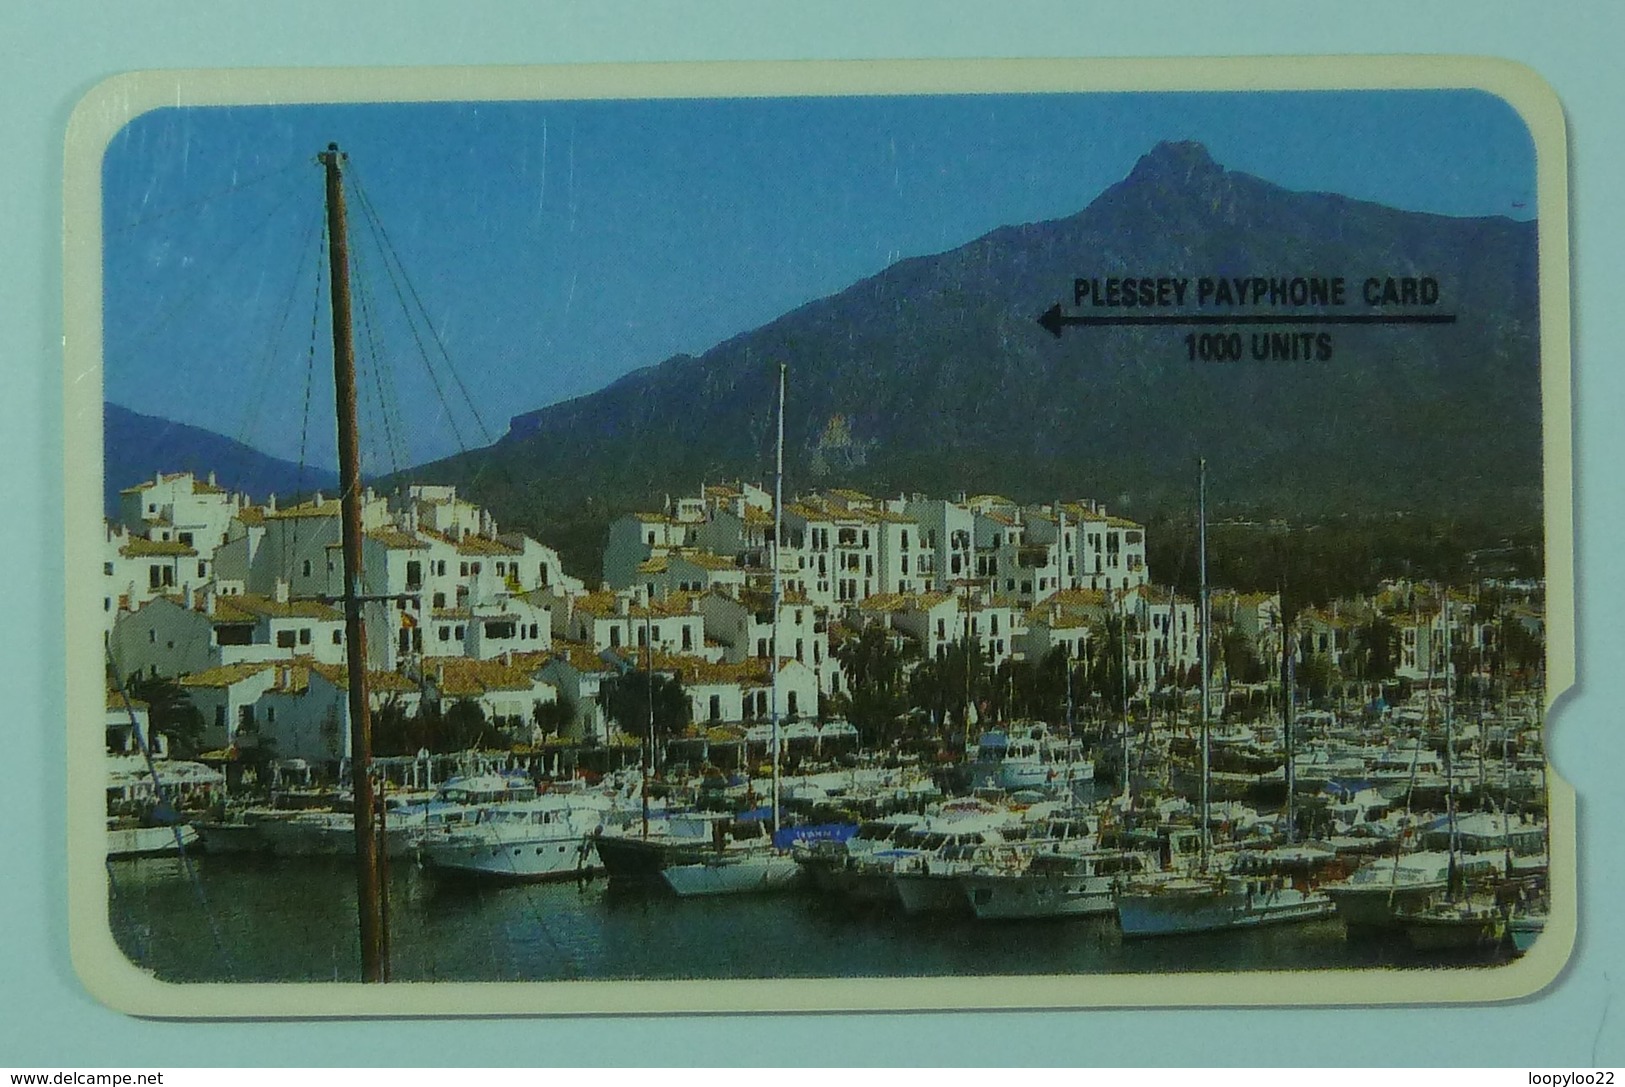 SPAIN - GPT - Plessey Test / Demo - 1987 - Cadaques Village Girona - Used - Tests & Servicios